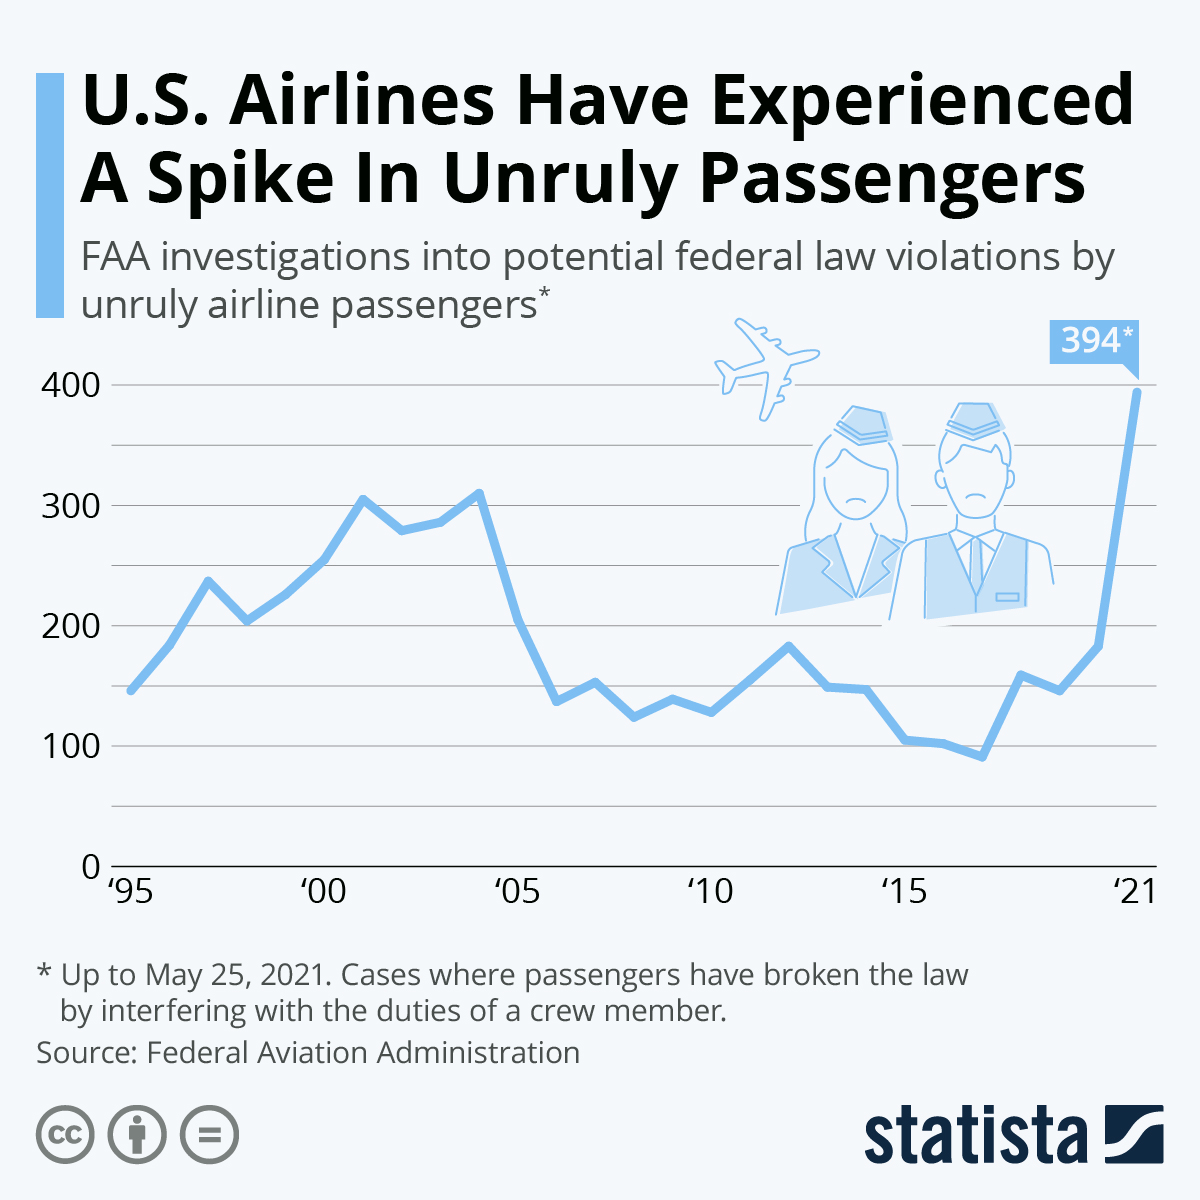 U.S. Airlines Have Experienced A Spike In Unruly Passengers